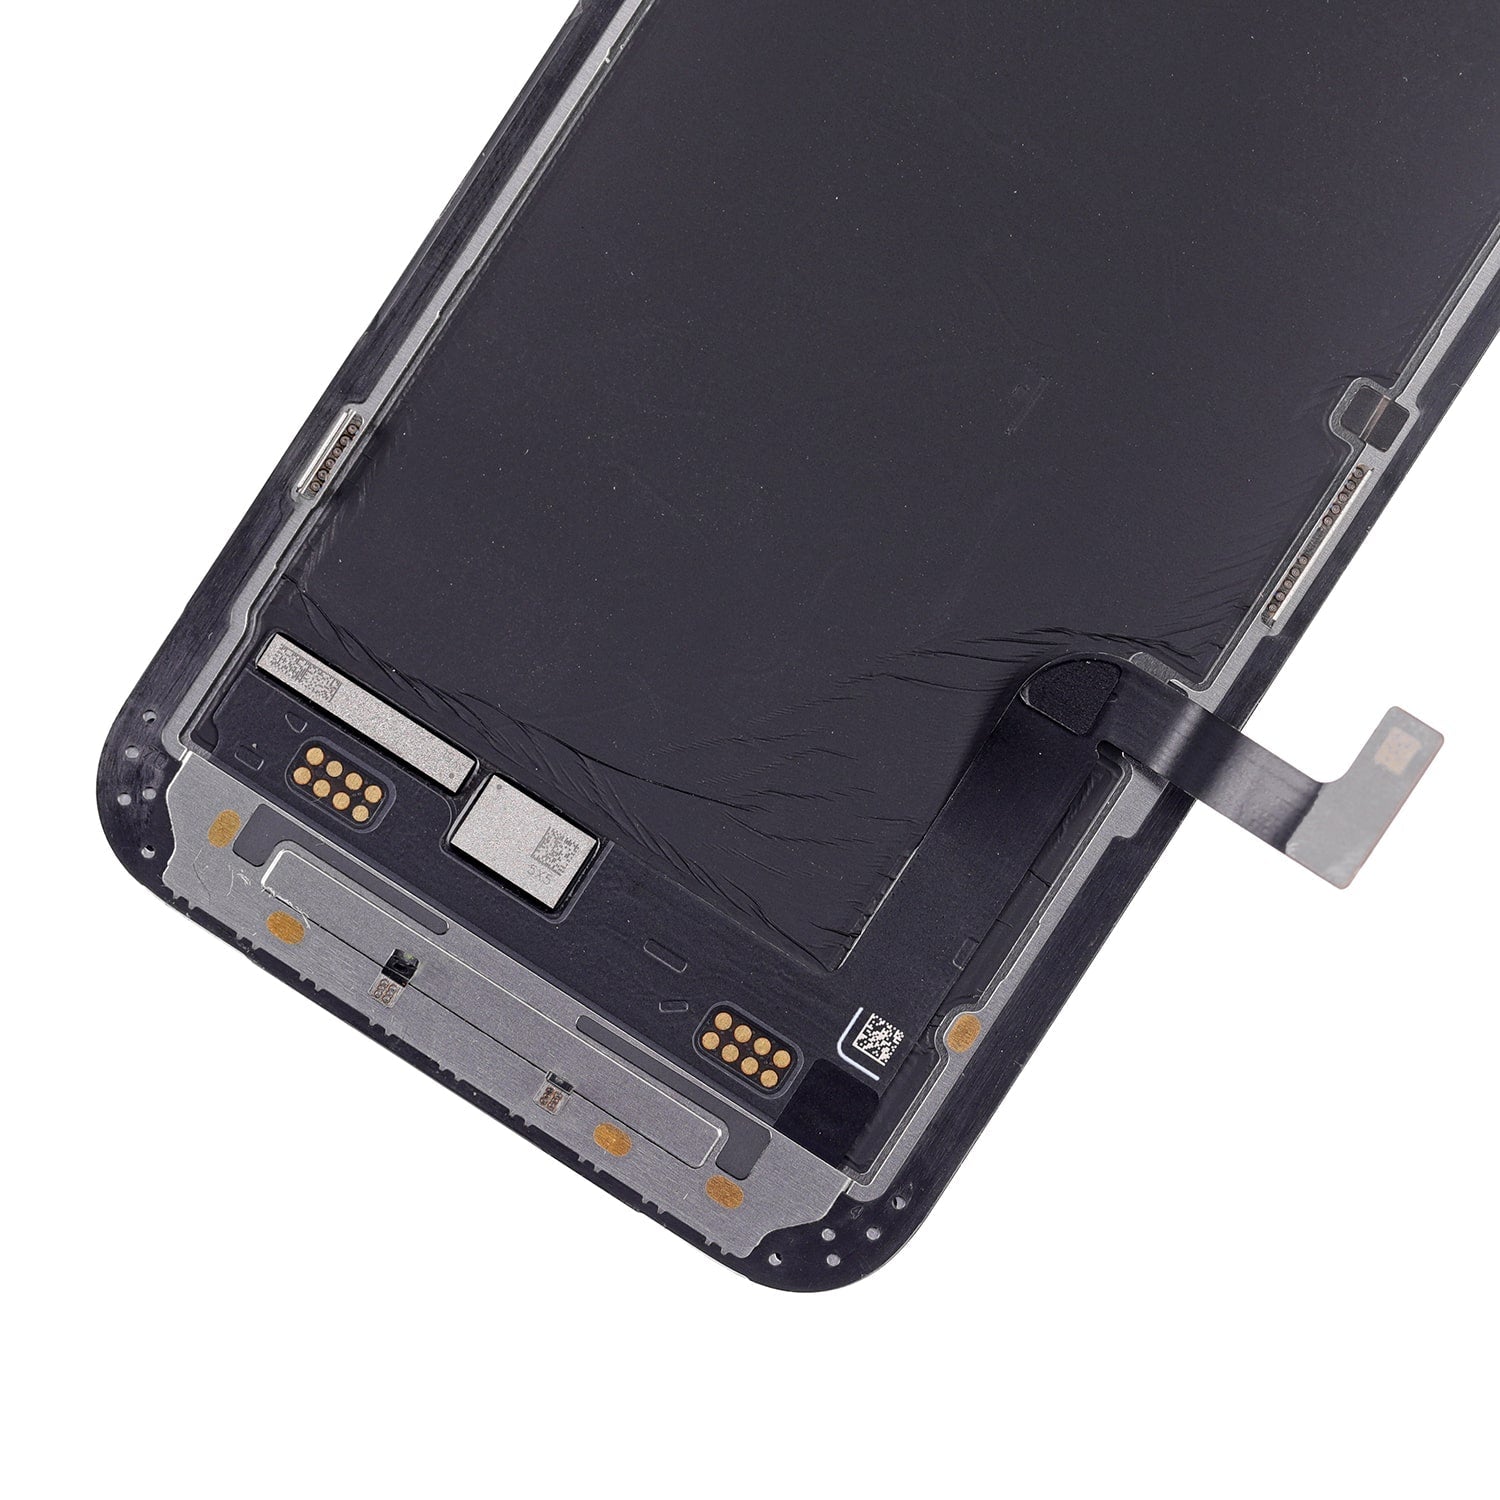 OLED SCREEN DIGITIZER ASSEMBLY FOR IPHONE 13 MINI  - BLACK